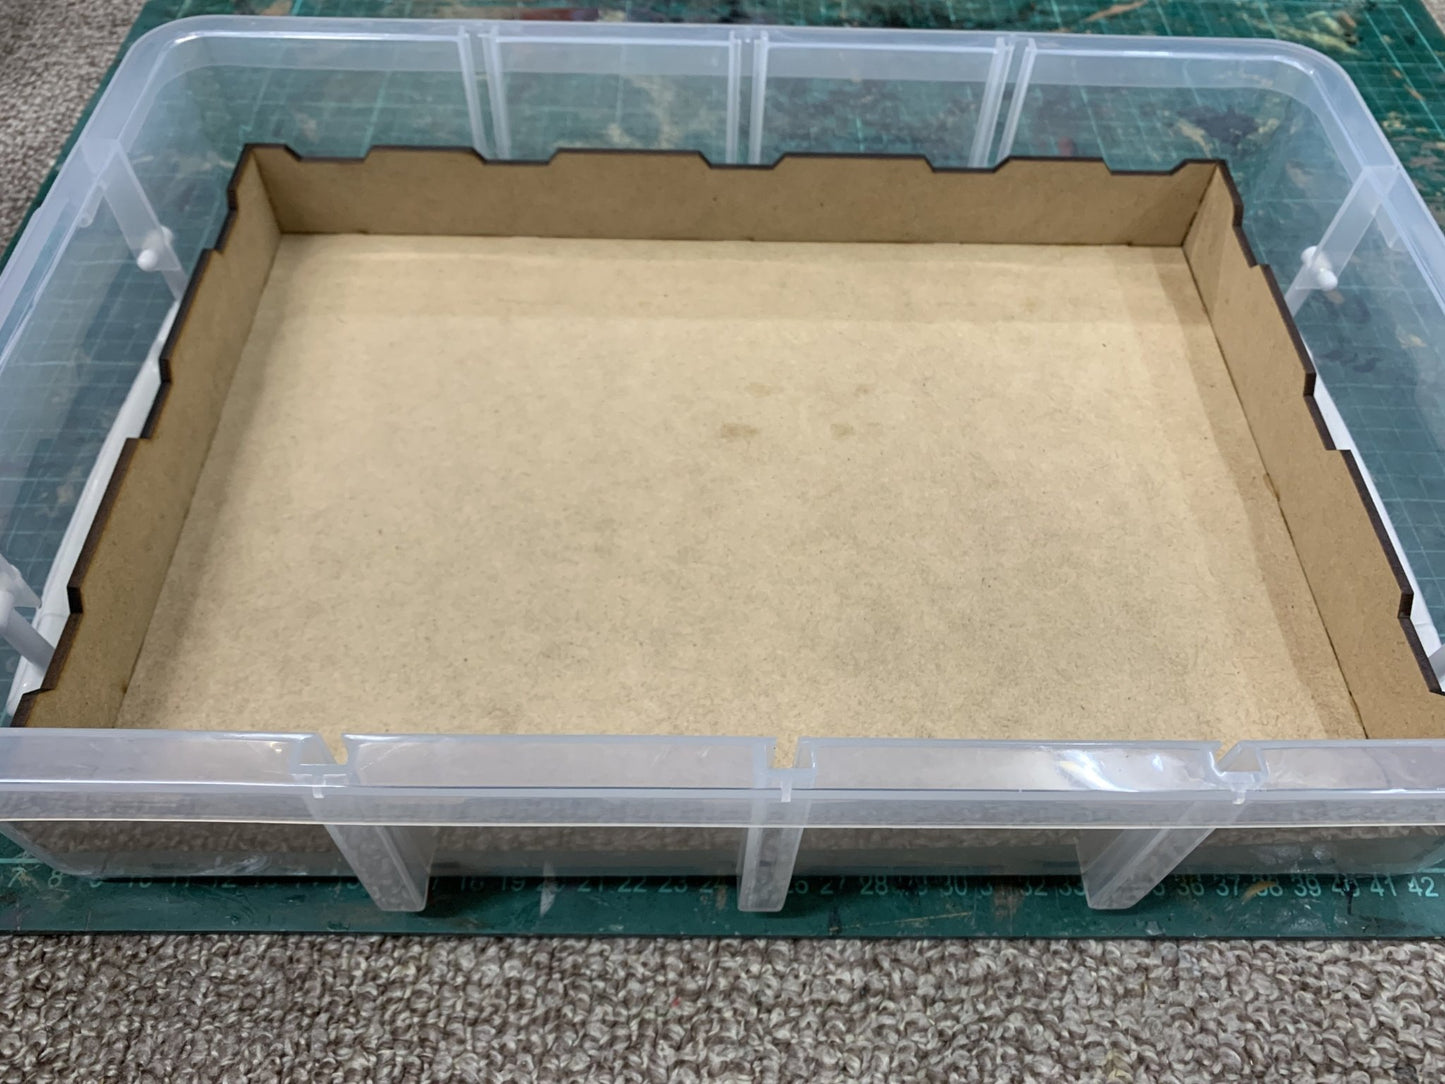 Store and Stack 5L Tray - Battlefield Accessories